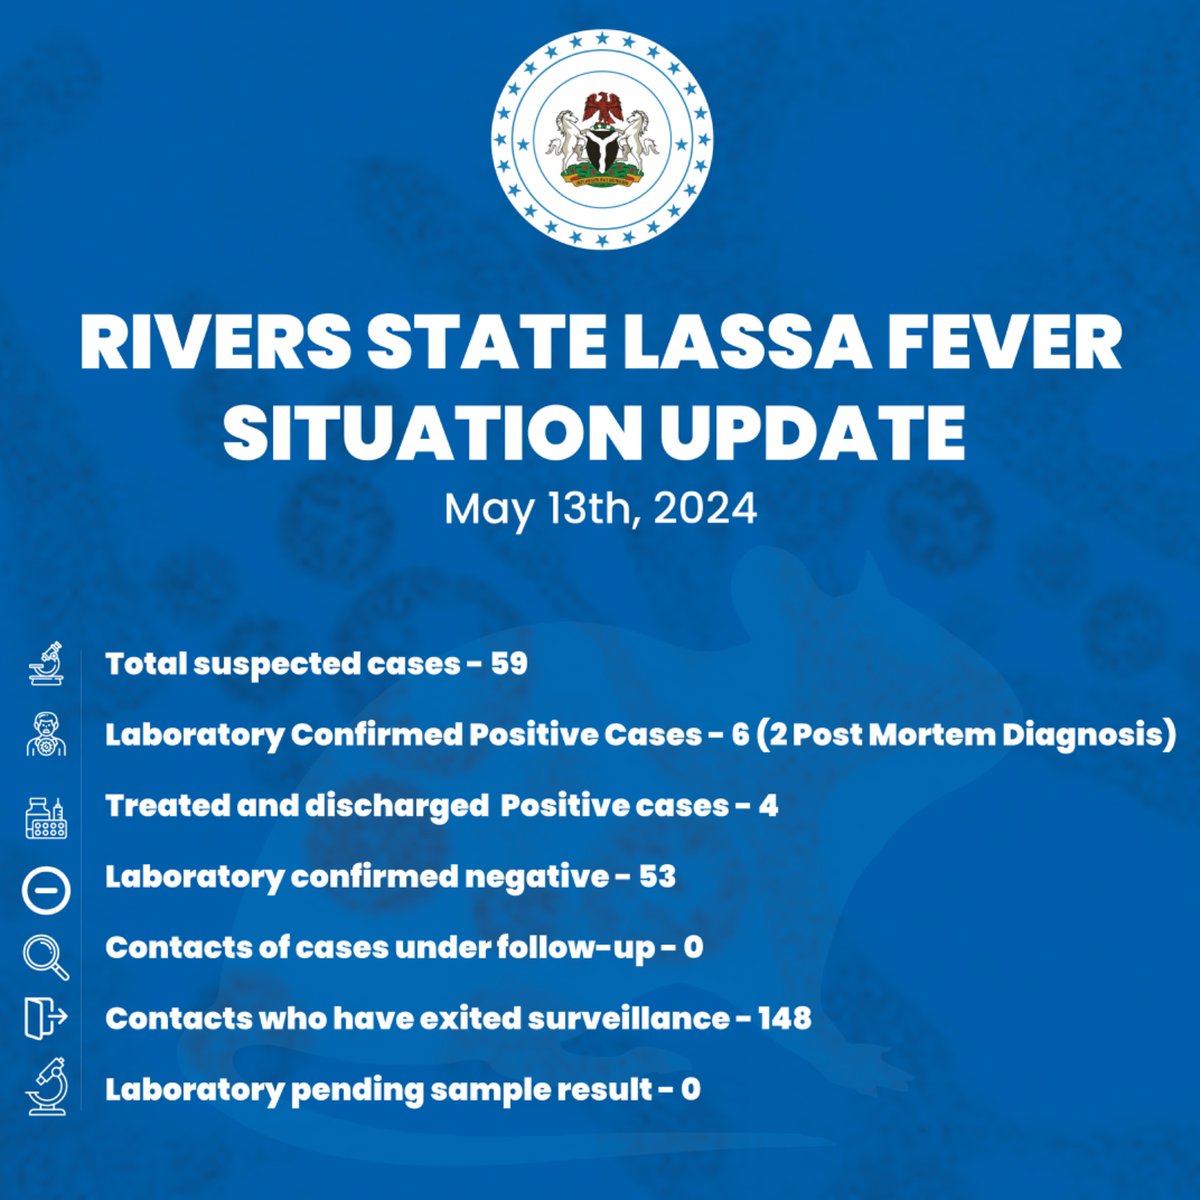 #LassaFever Situation Update in Rivers State (13/05/2024) Total Suspected Cases: 59 Laboratory Confirmed Positive Cases: 6 (2 Post mortem) Treated and Discharged Positive Cases: 4 Laboratory Confirmed Negative Cases: 53 Contacts of Cases under Follow-up: 0 Contacts who have